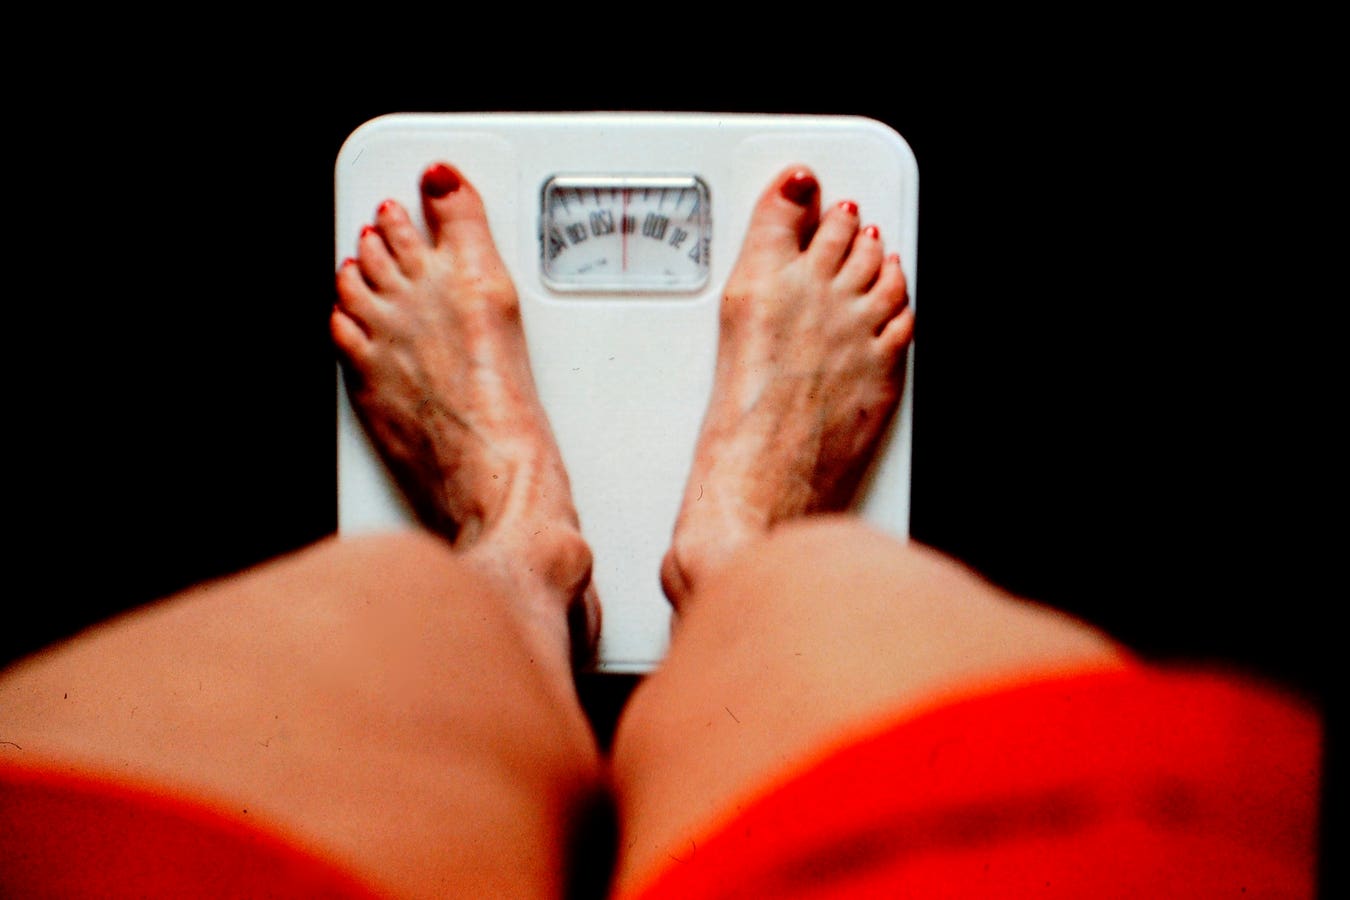 Family Pressure To Lose Weight In Adolescence Linked to Internalized Weight Stigma